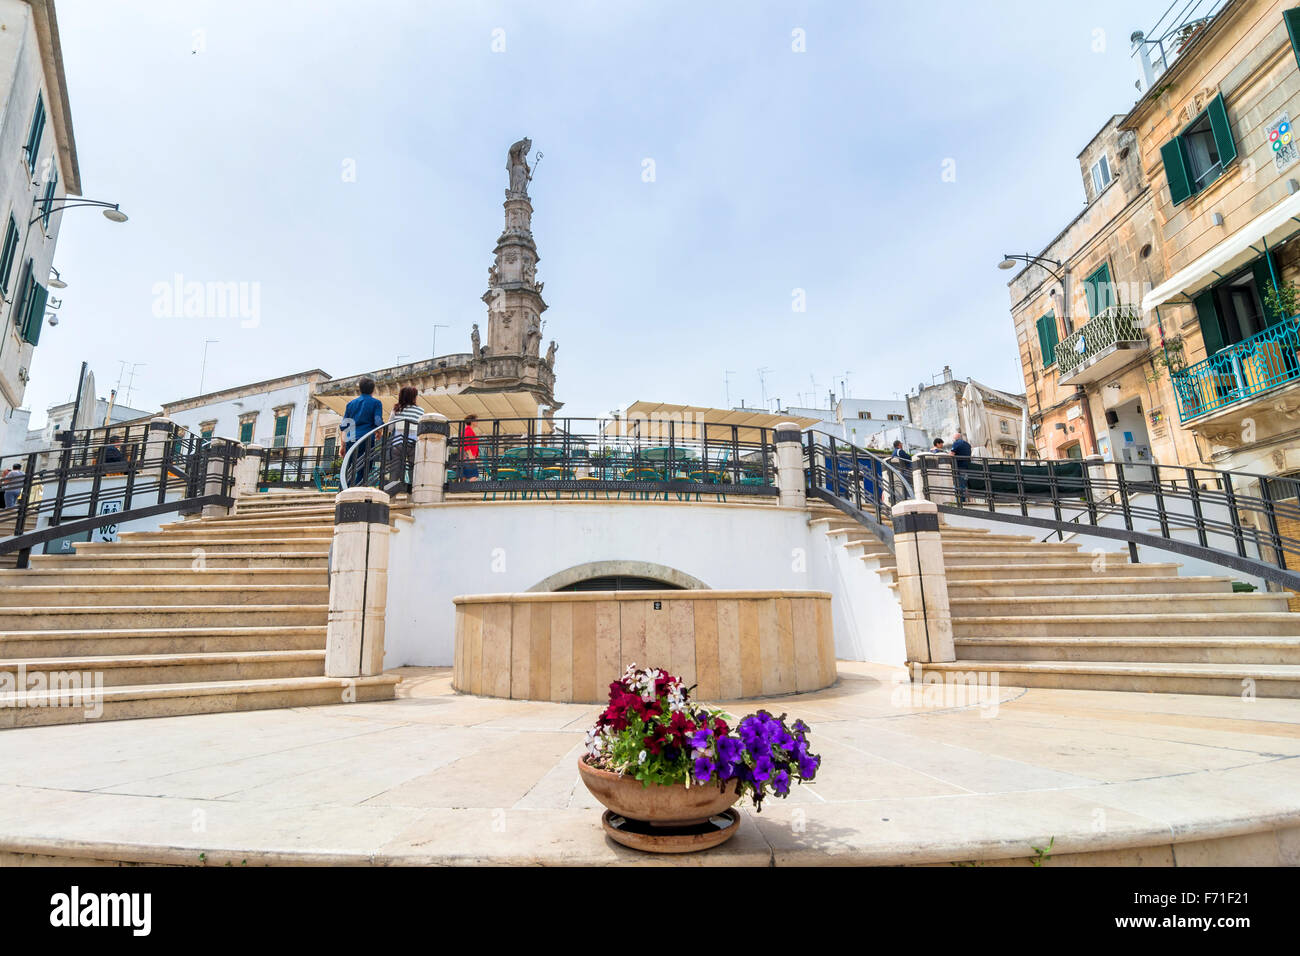 old town and Statue of San Oronzo in Ostuni, Italy. Stock Photo